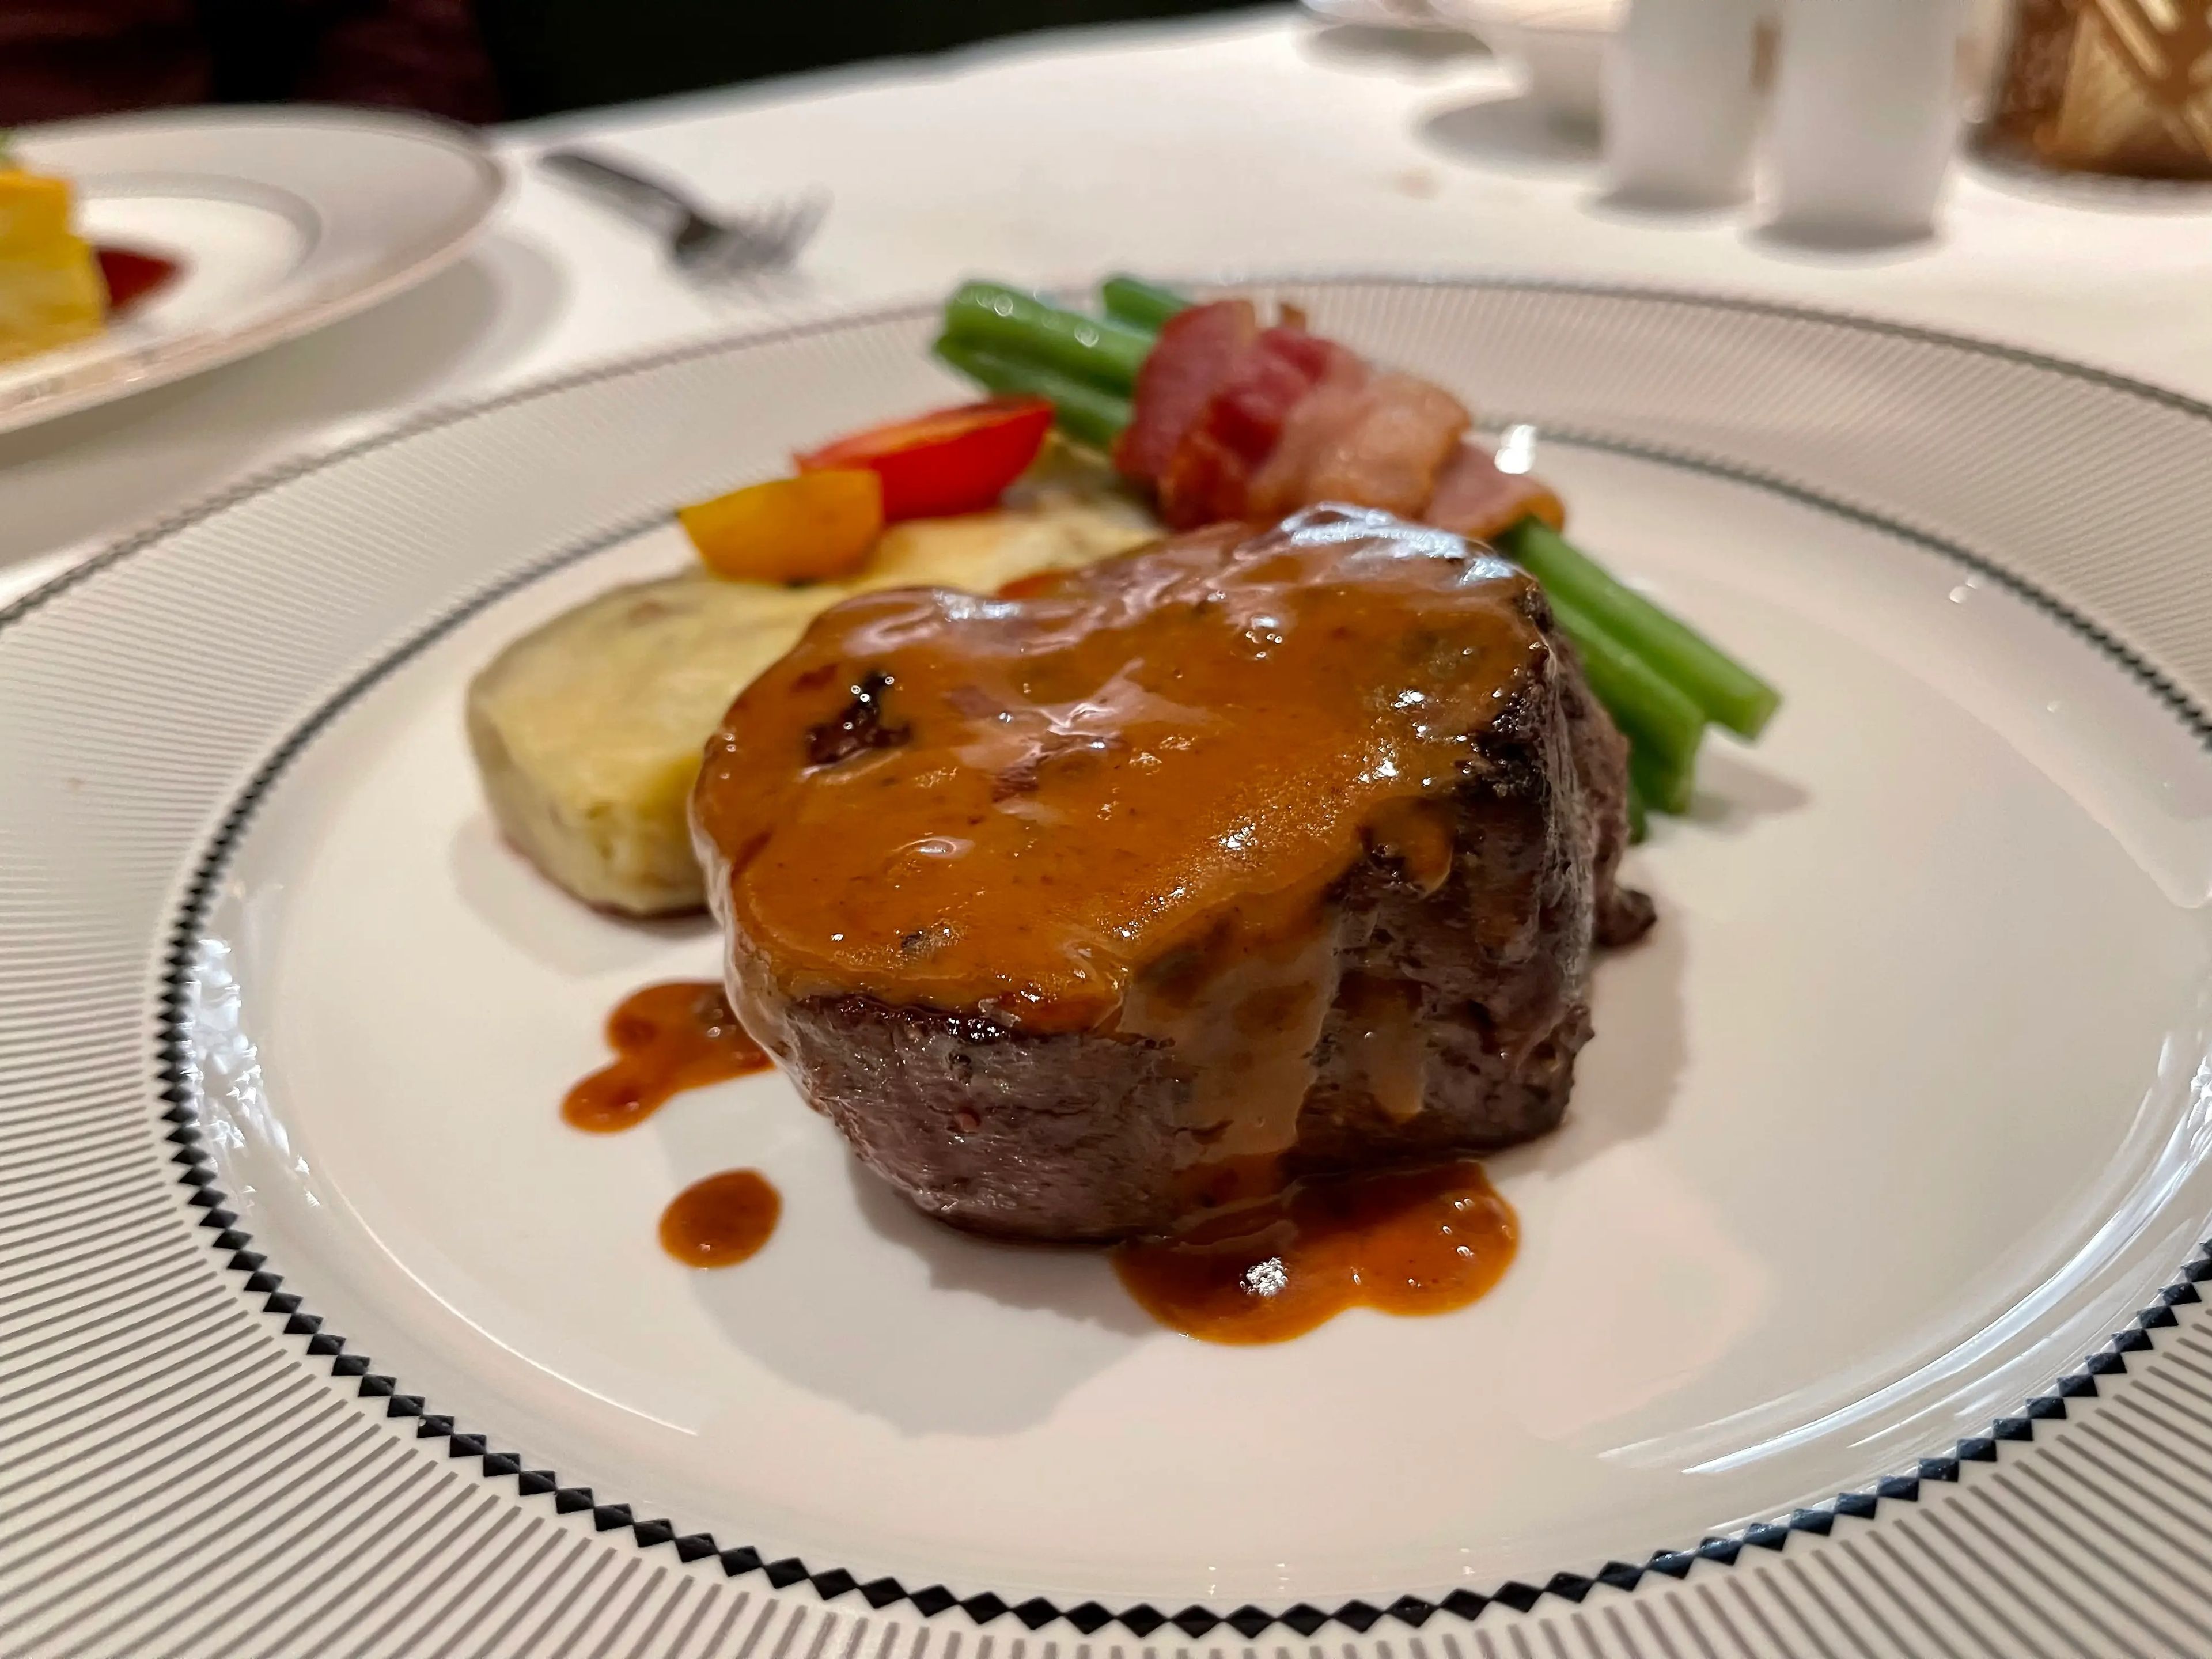 A piece of steak with gravy and vegetables on a plate.